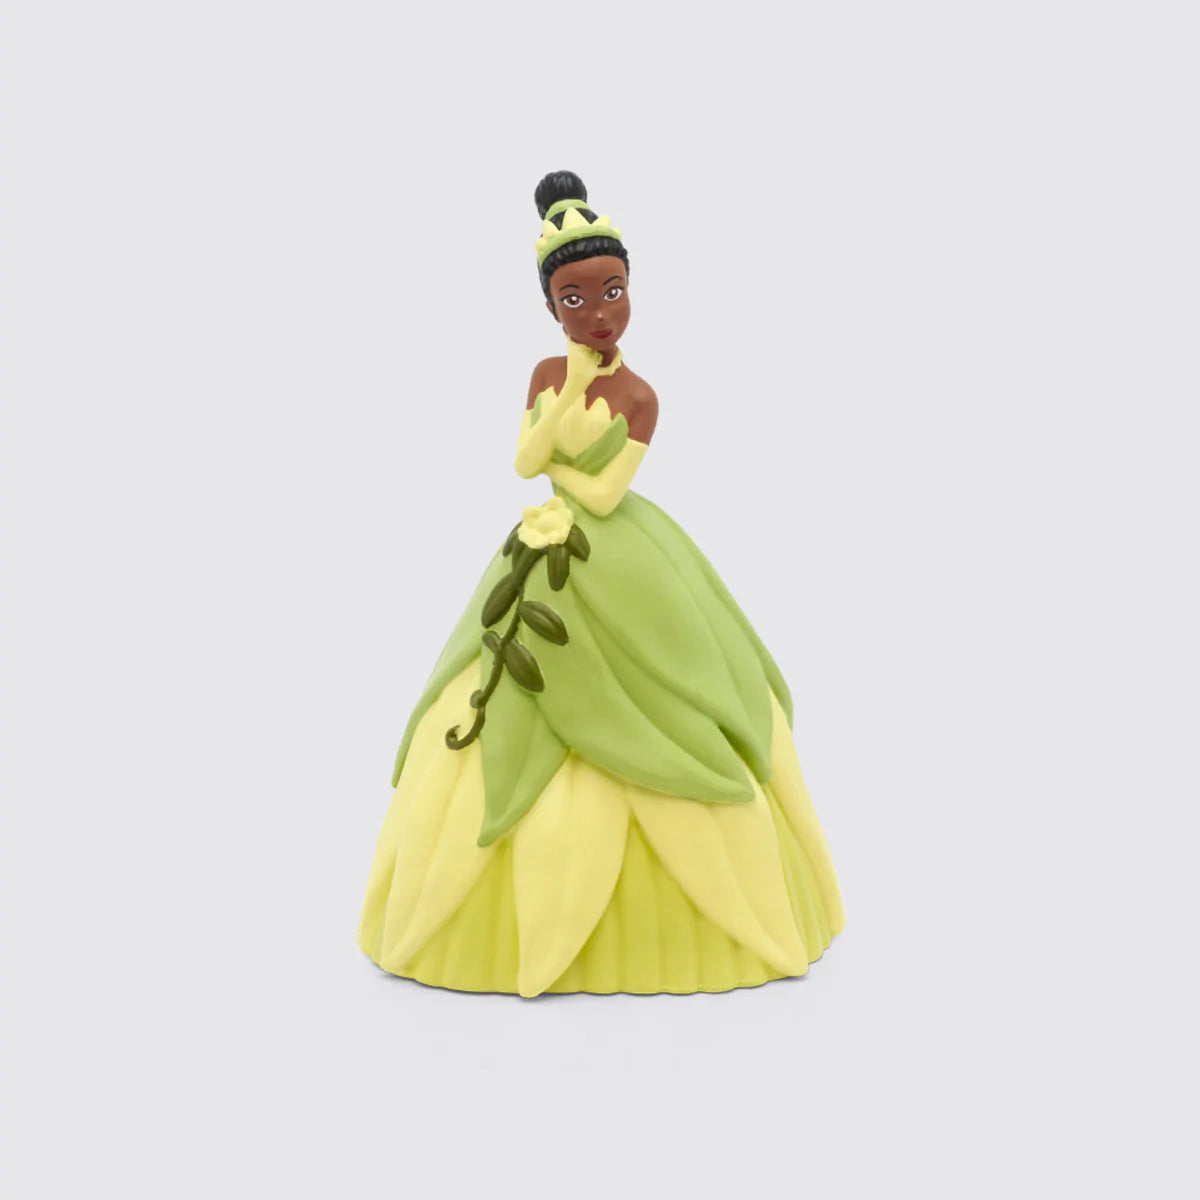 Tonies Tiana Audio Play Character from Disney's the Princess & the Frog